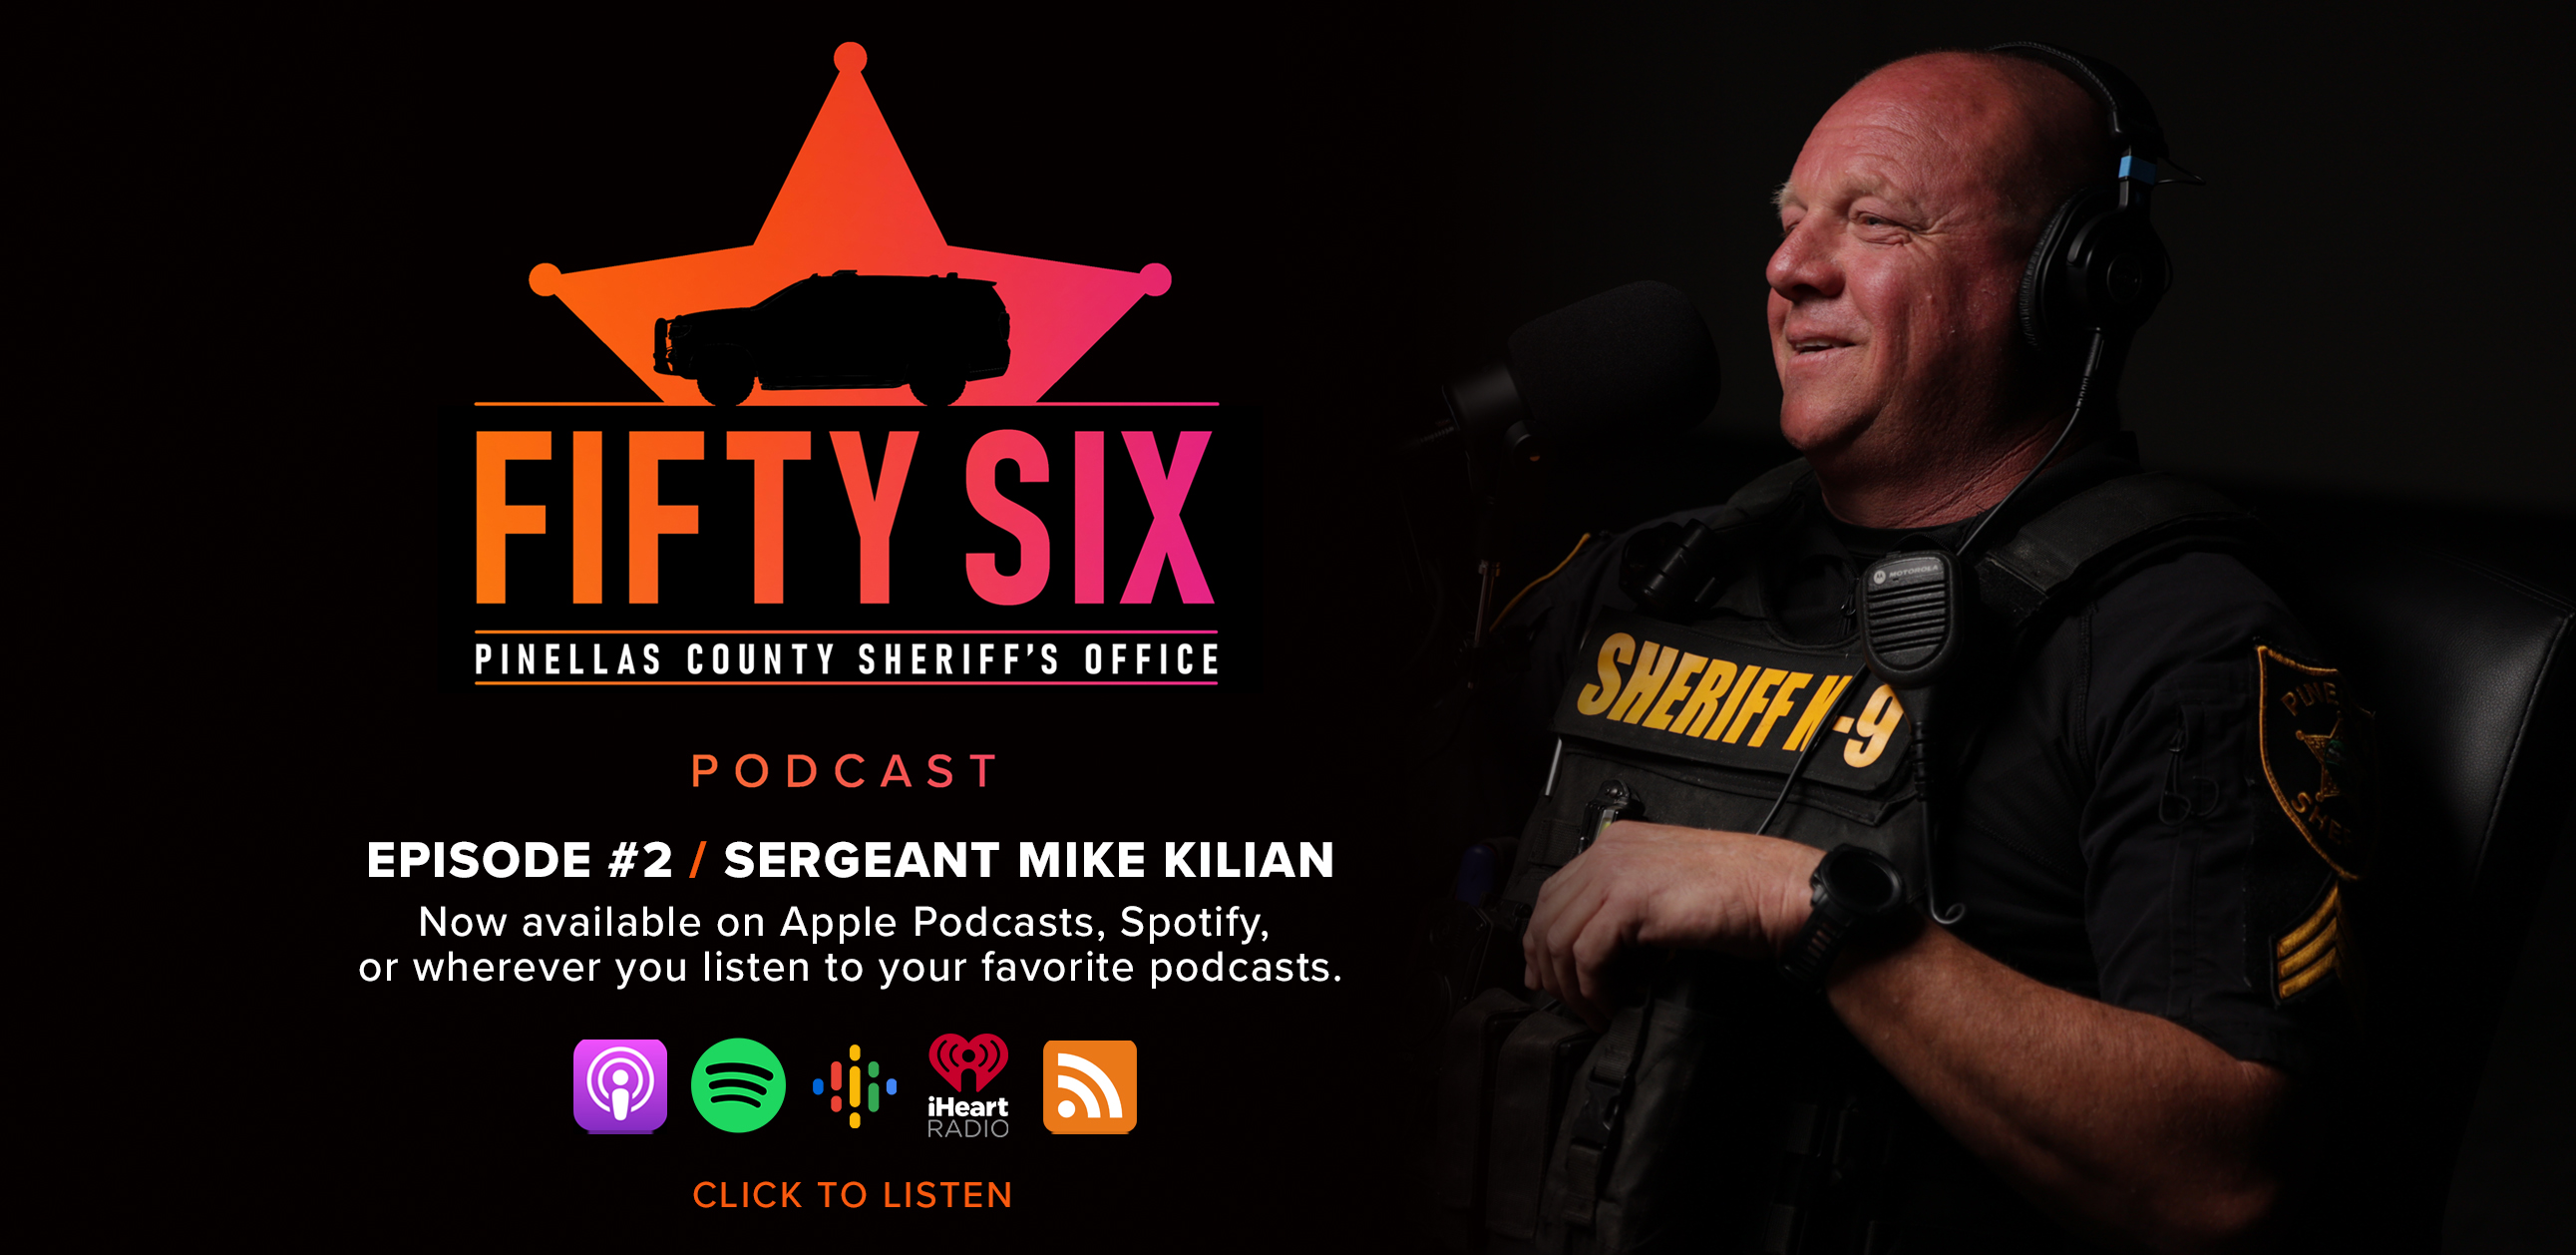 Fifty Six, Pinellas County Sheriff's Office Podcast, Episode #2 Sergeant Mike Kilian, Now Available on Apple Podcasts, Click to Listen